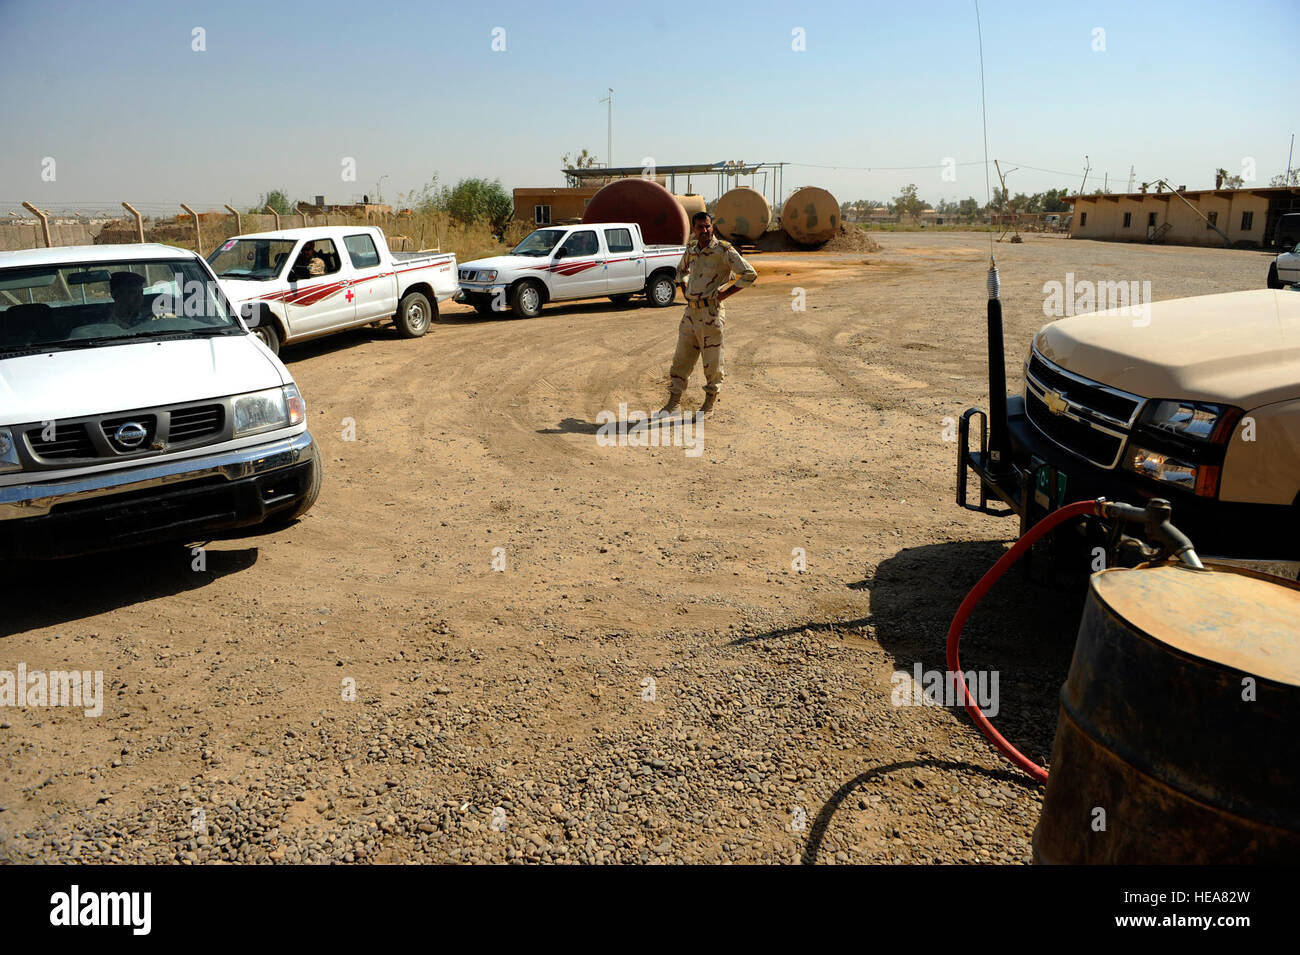 Iraqi soldiers wait in line to refuel their vehicles at Camp Taji, near Baghdad, Iraq, July 11. The Iraqi fuels depot is run exclusively by the Iraqi army with some assistance from an American Airman assigned to the Logistics Military Advisor Team. Stock Photo